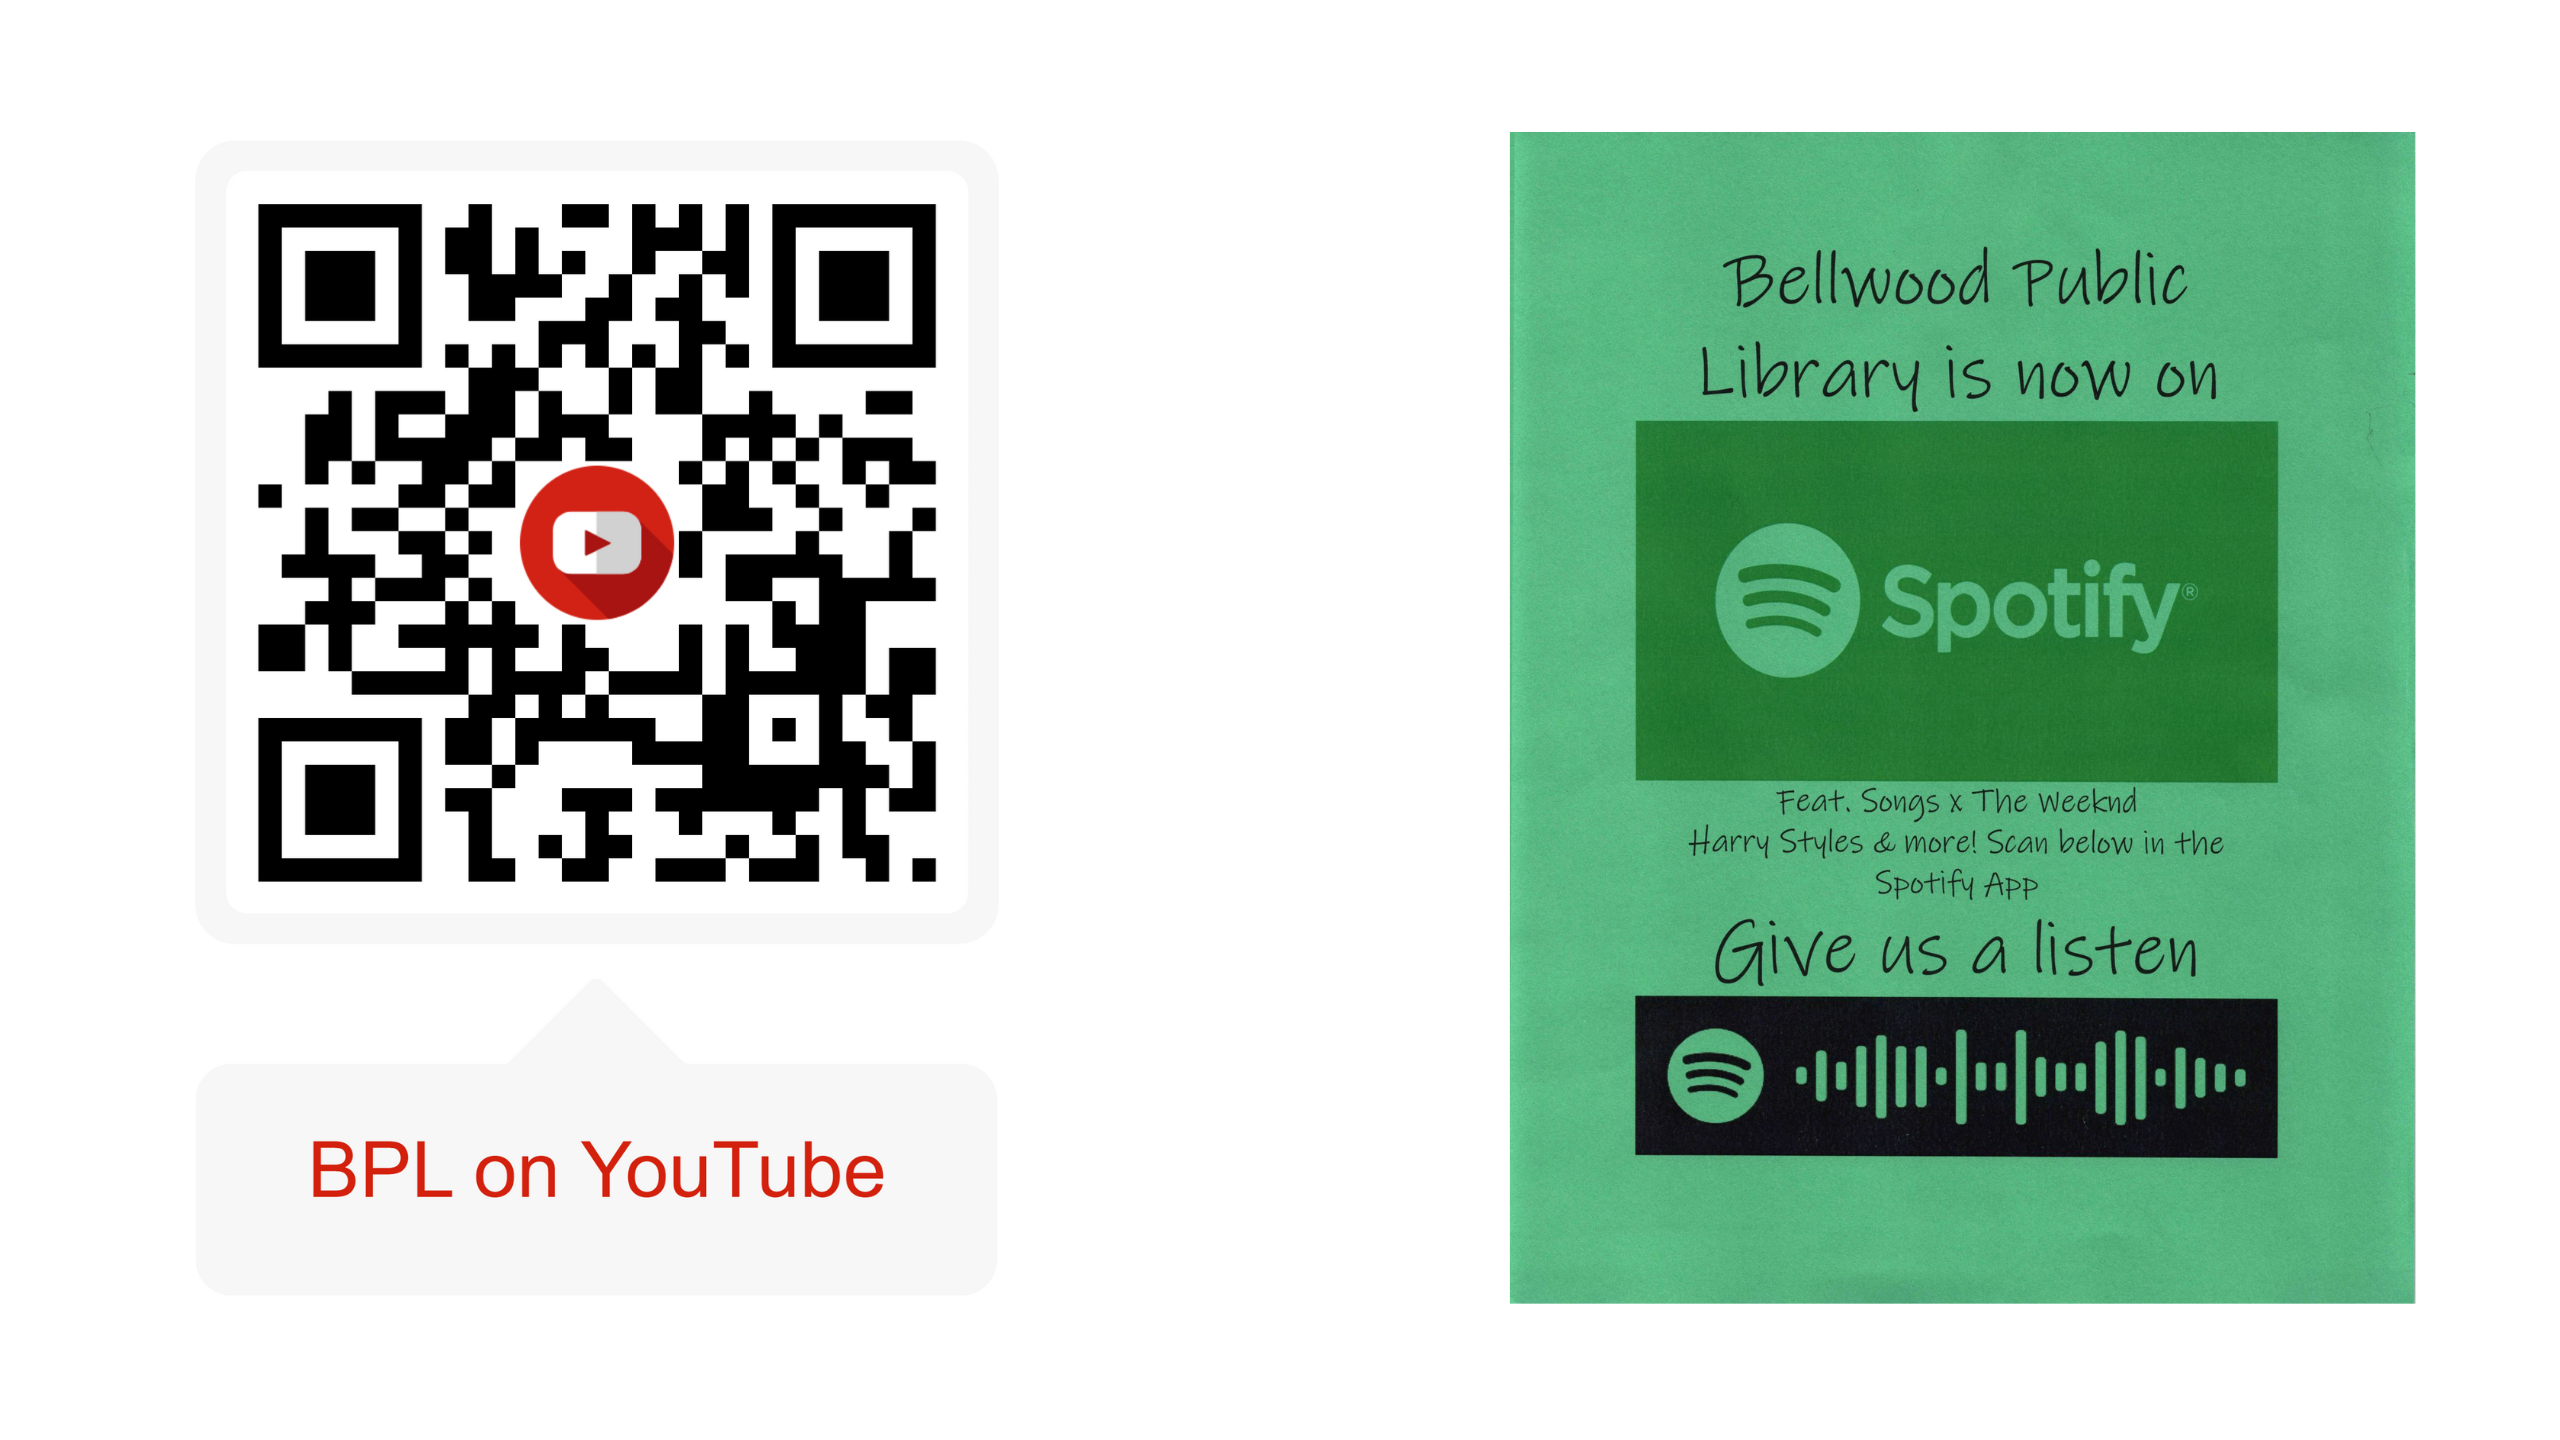 qr codes linking to the library's youtube and spotify playlists